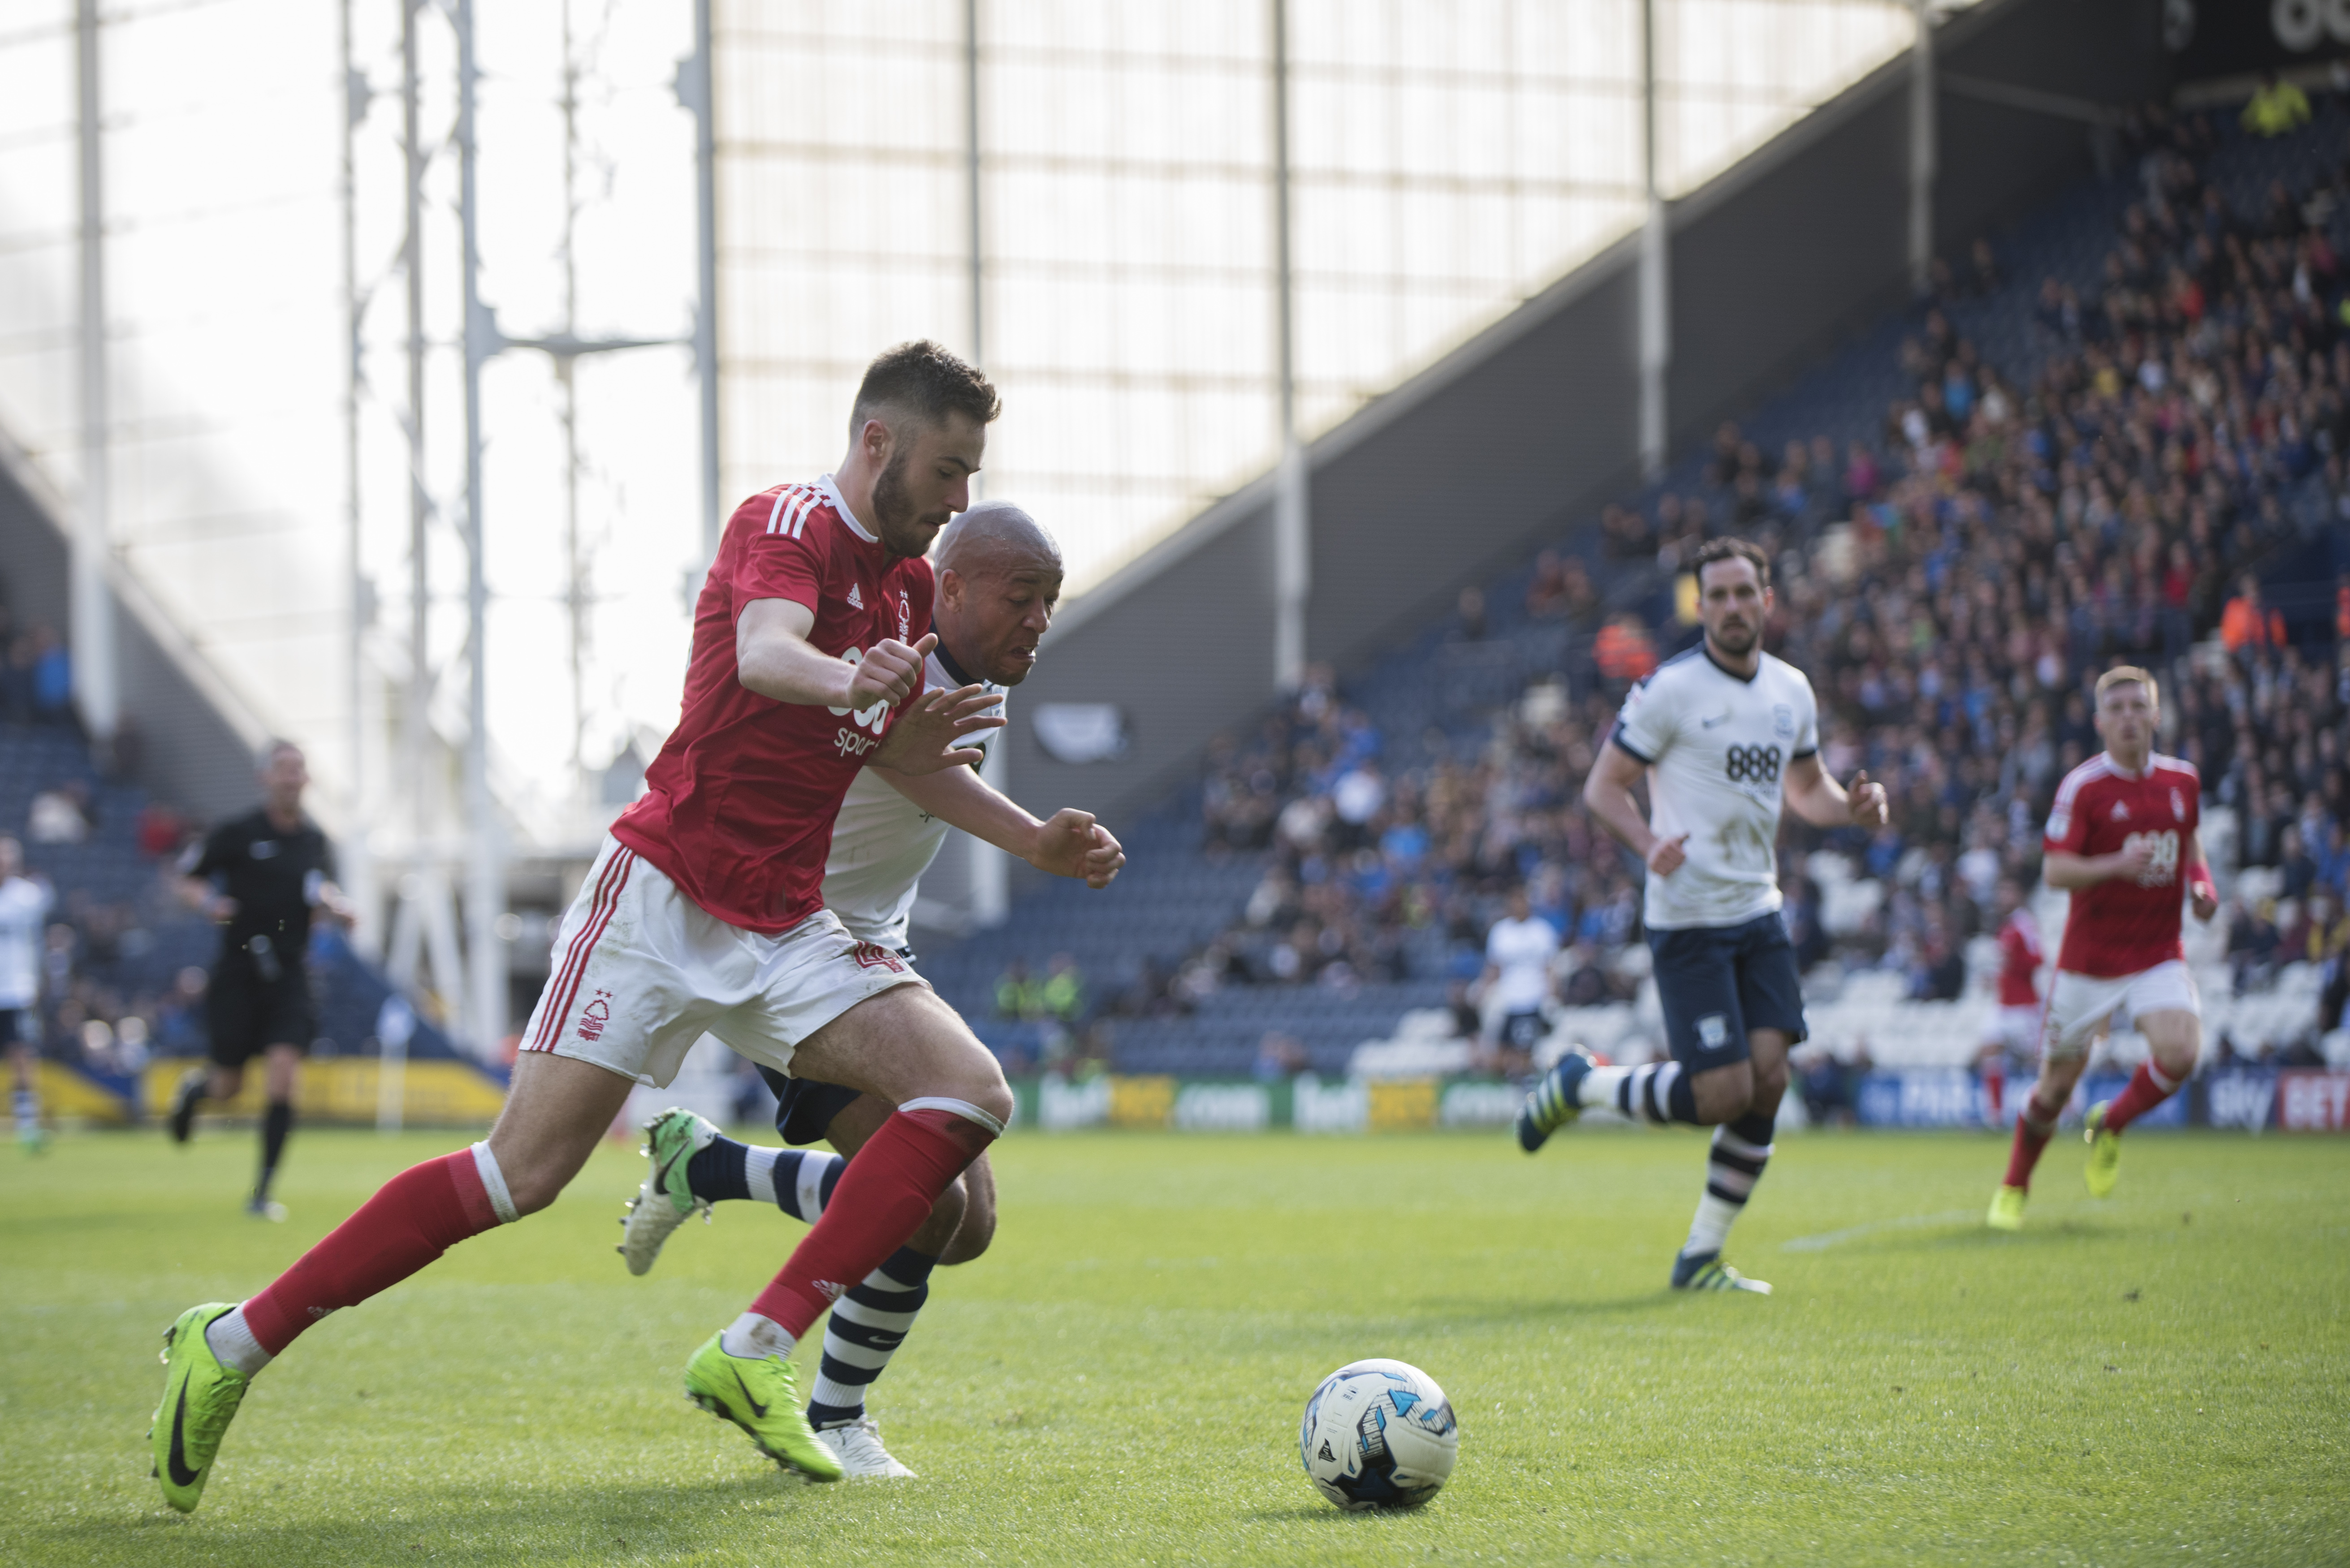 PRESTON, ENGLAND- APRIL 1:  Ben Brereton of Nottingham Forest and Alex Baptise of Preston North End  in action during the Sky Bet Championship match between Preston North End and Nottingham Forest at Deepdale on April 1, 2017 in Preston, England. (Photo by Nathan Stirk/Getty Images)